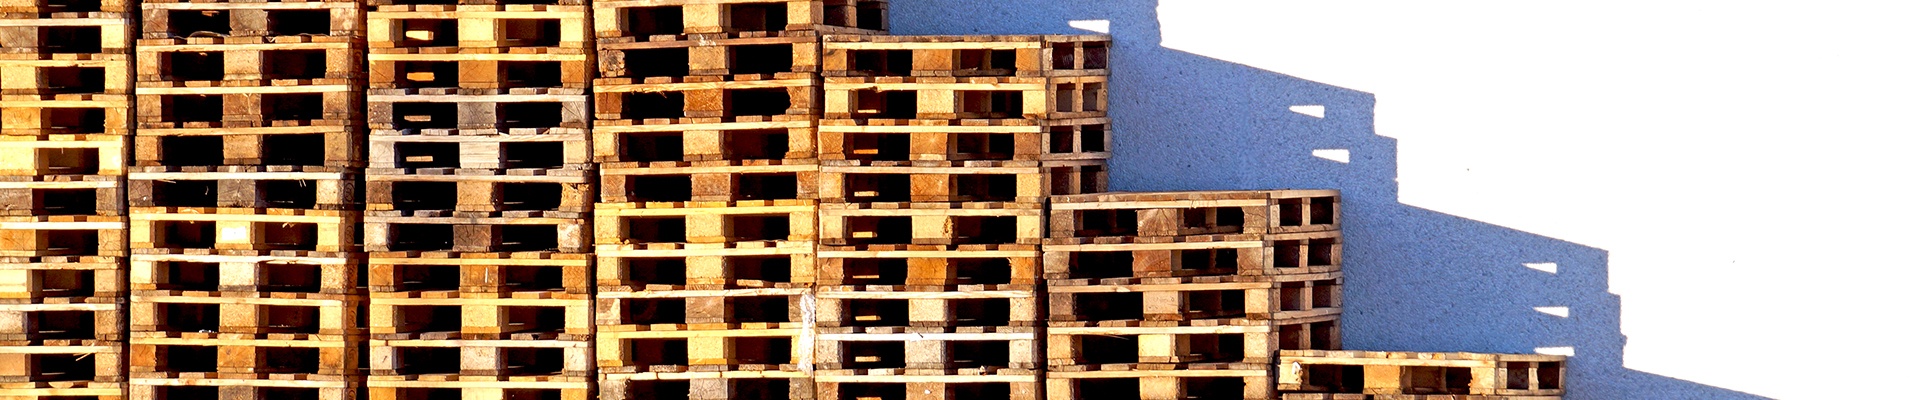 pallets-stacked